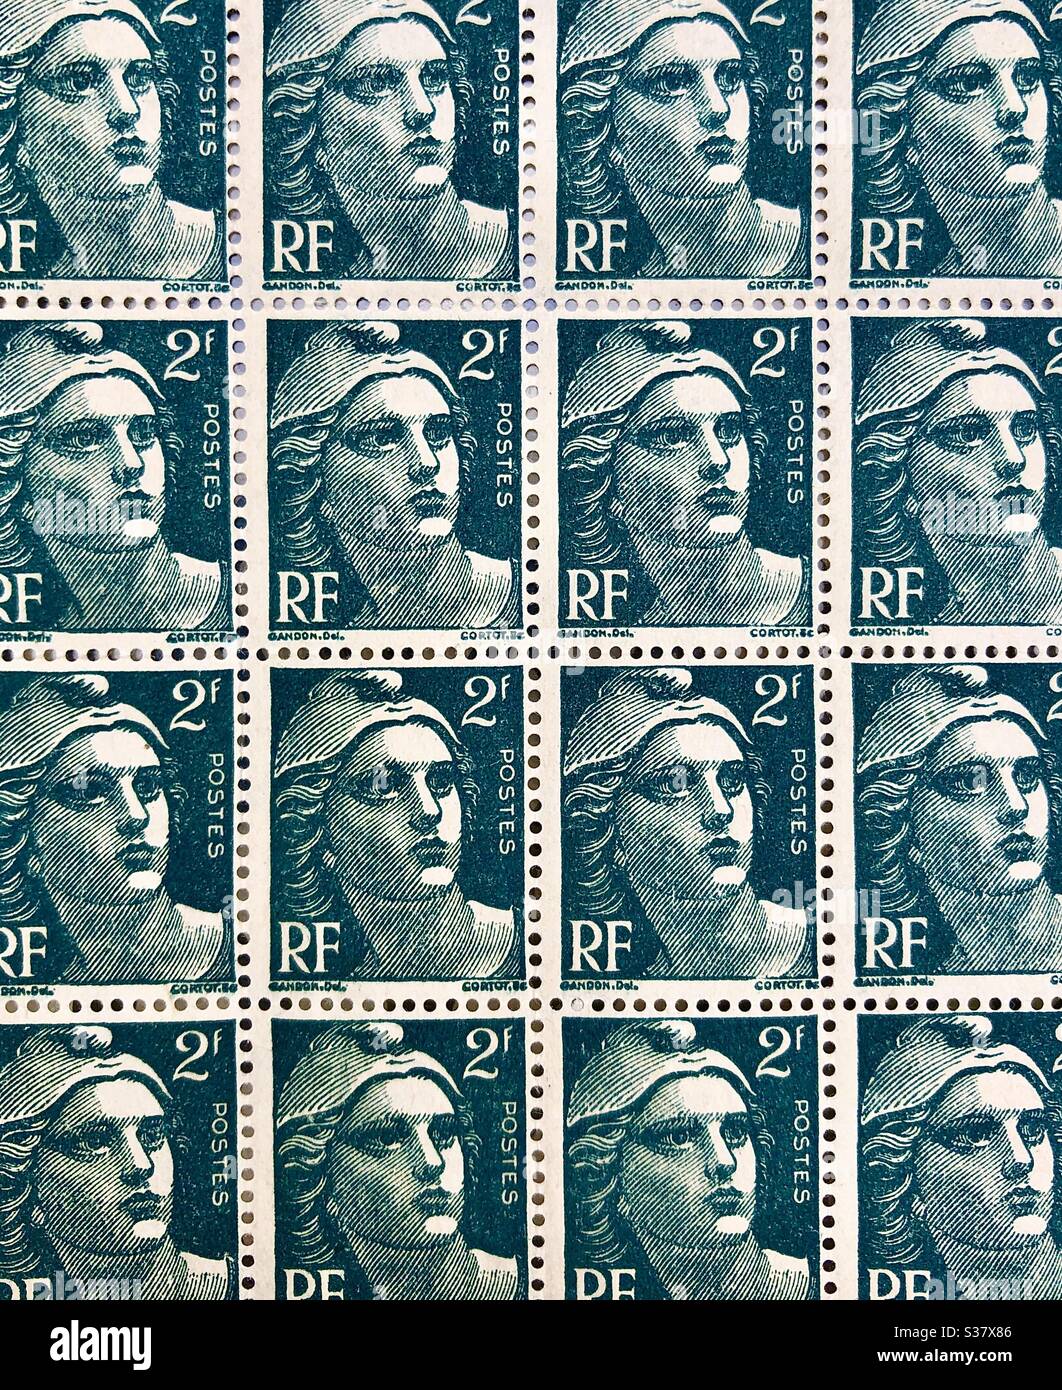 Unused block of 1940s / 1950s “Marianne de Gandon” French définitive postage stamp. Stock Photo